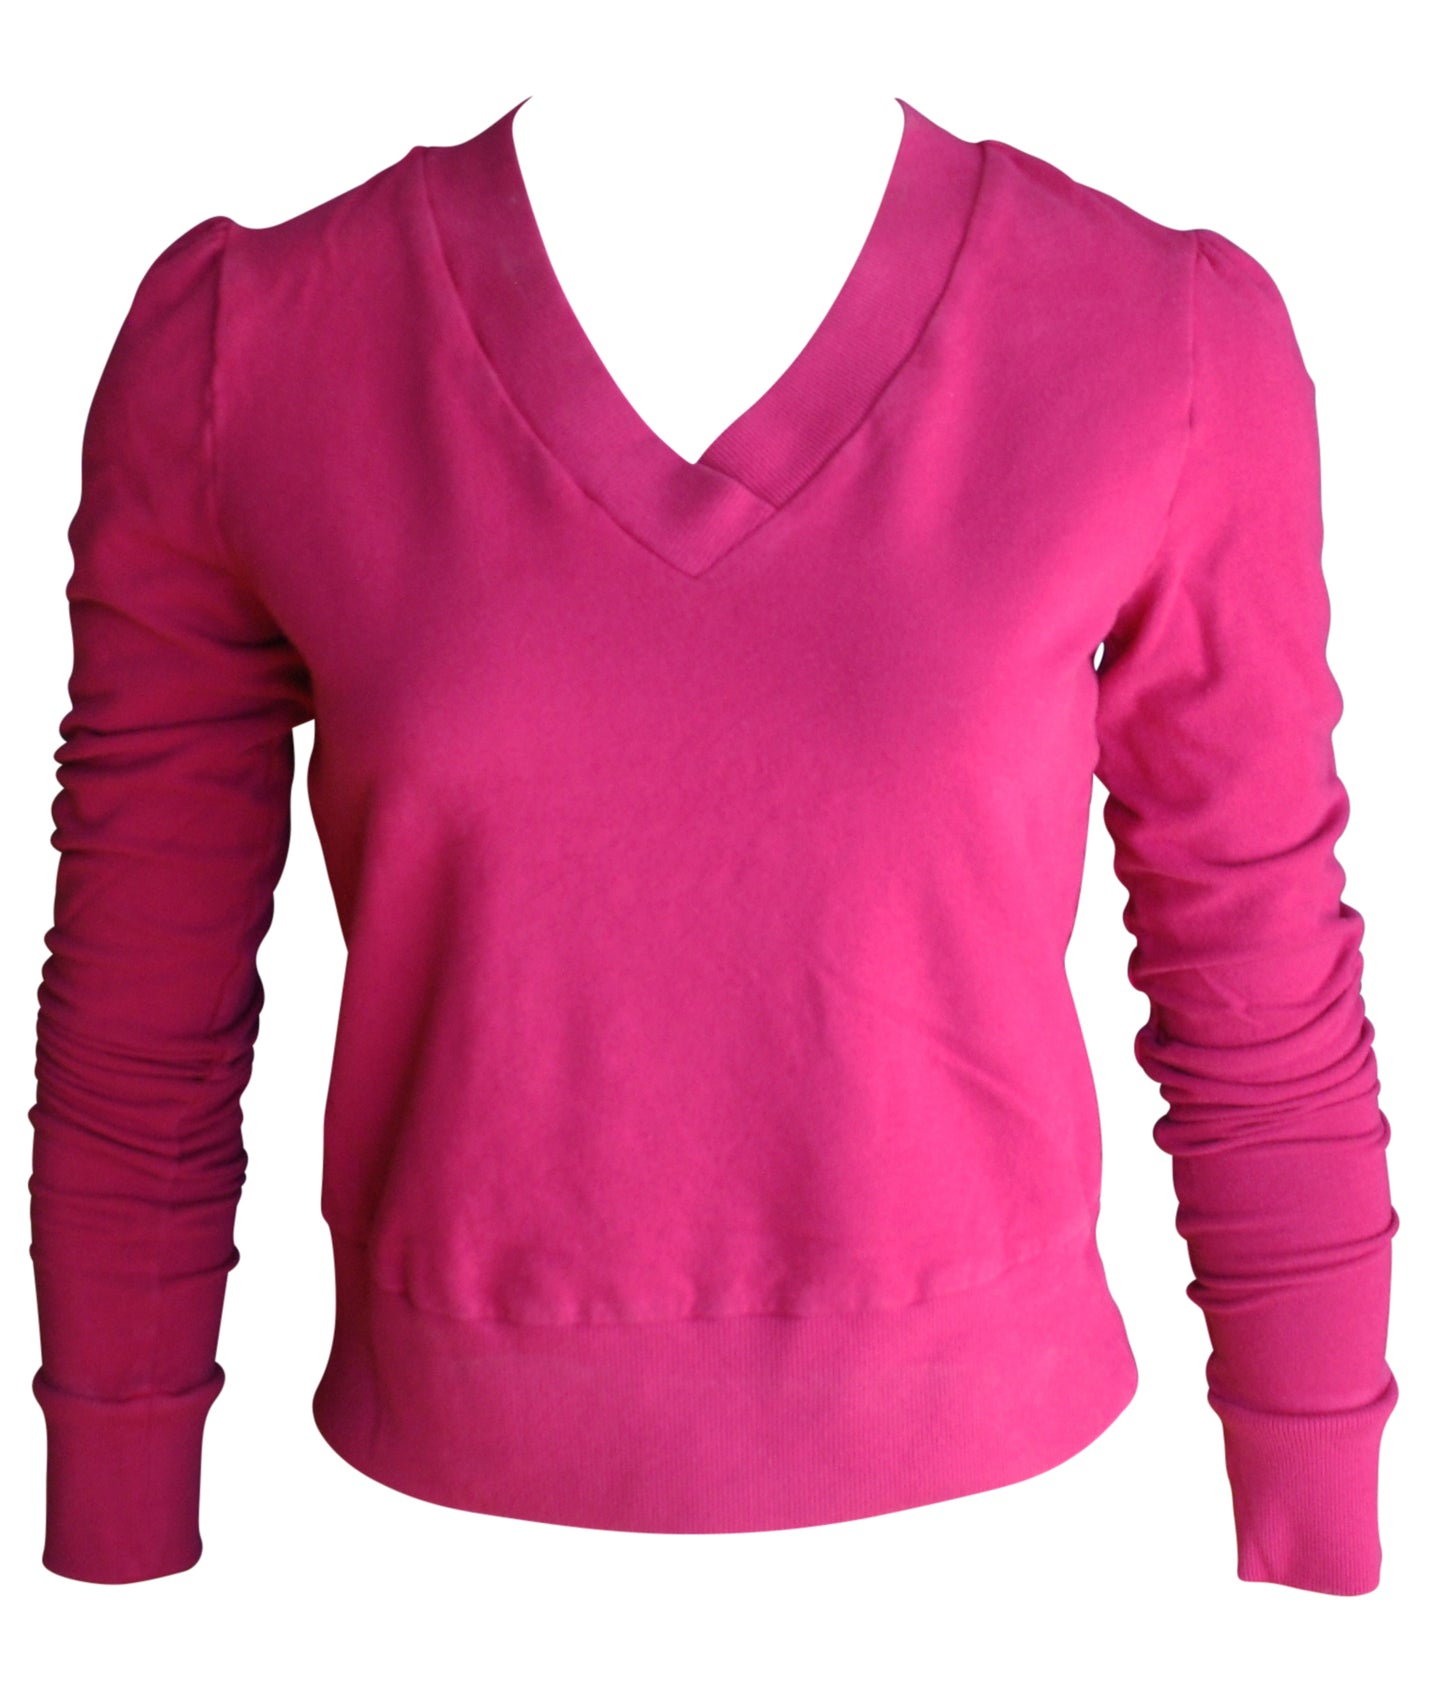 Bright pink v-neck French terry top with rib trim